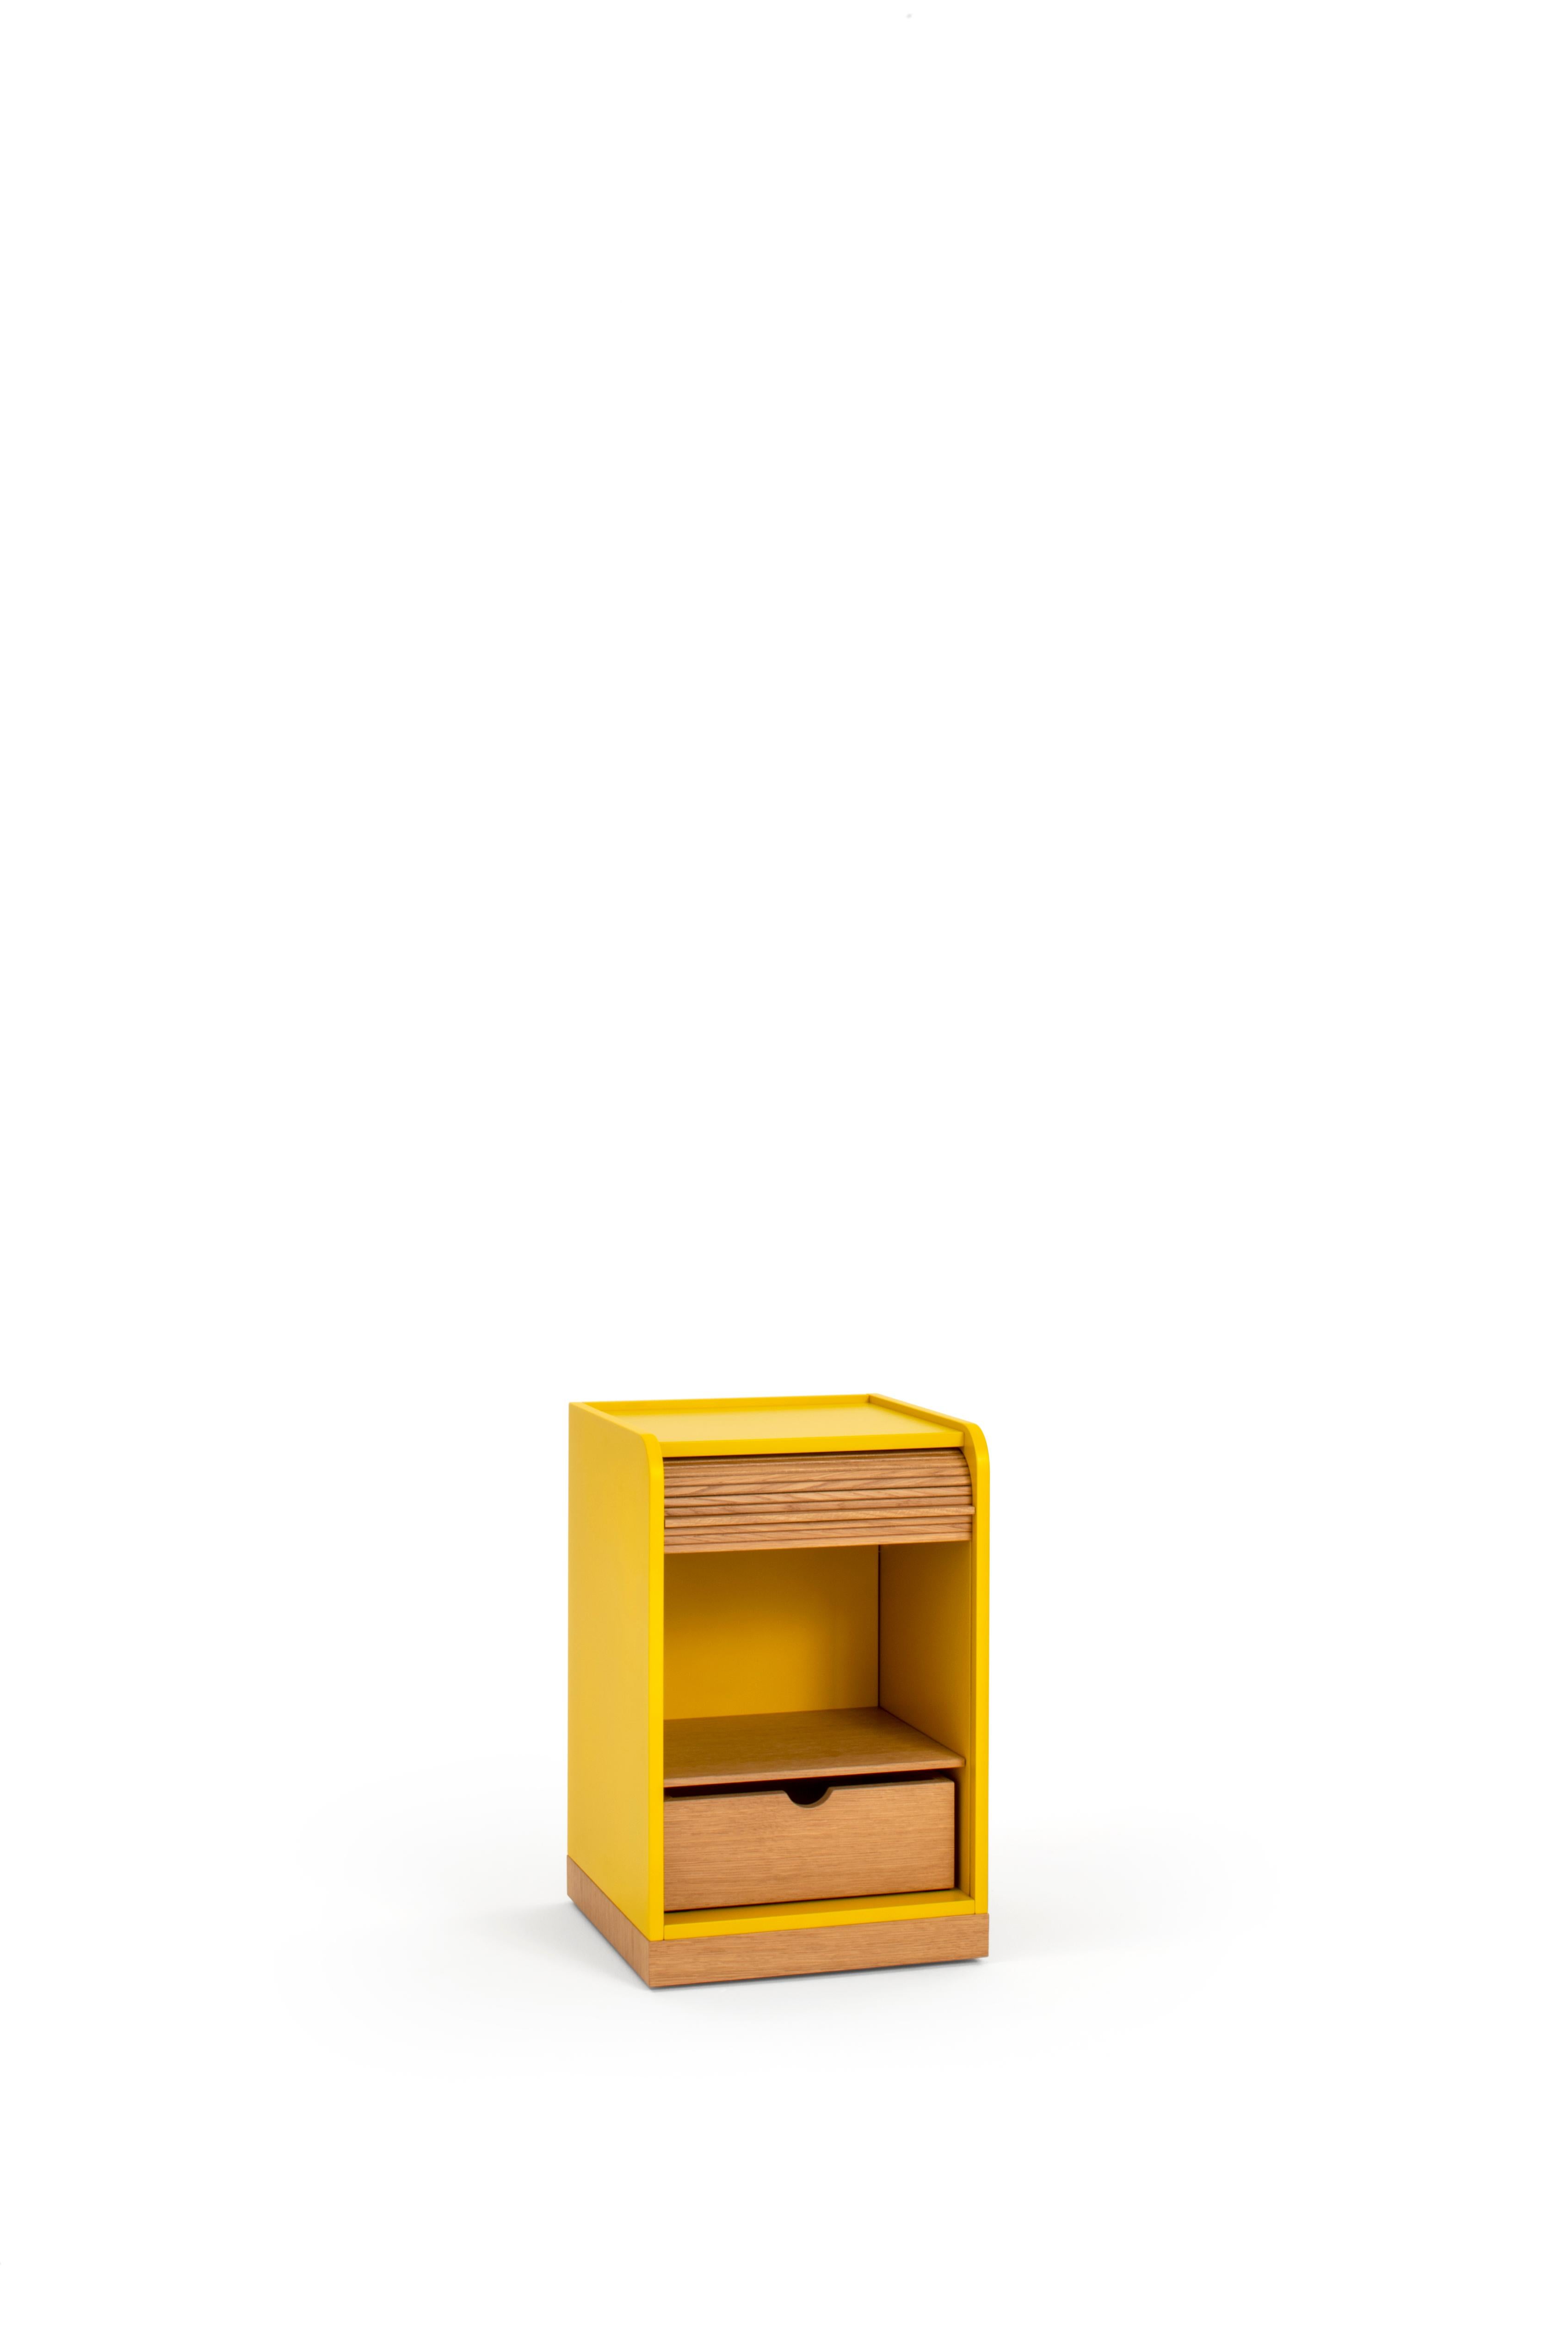 Contemporary Tapparelle Wheels Cabinet, Mustard Yellow by Colé Italia